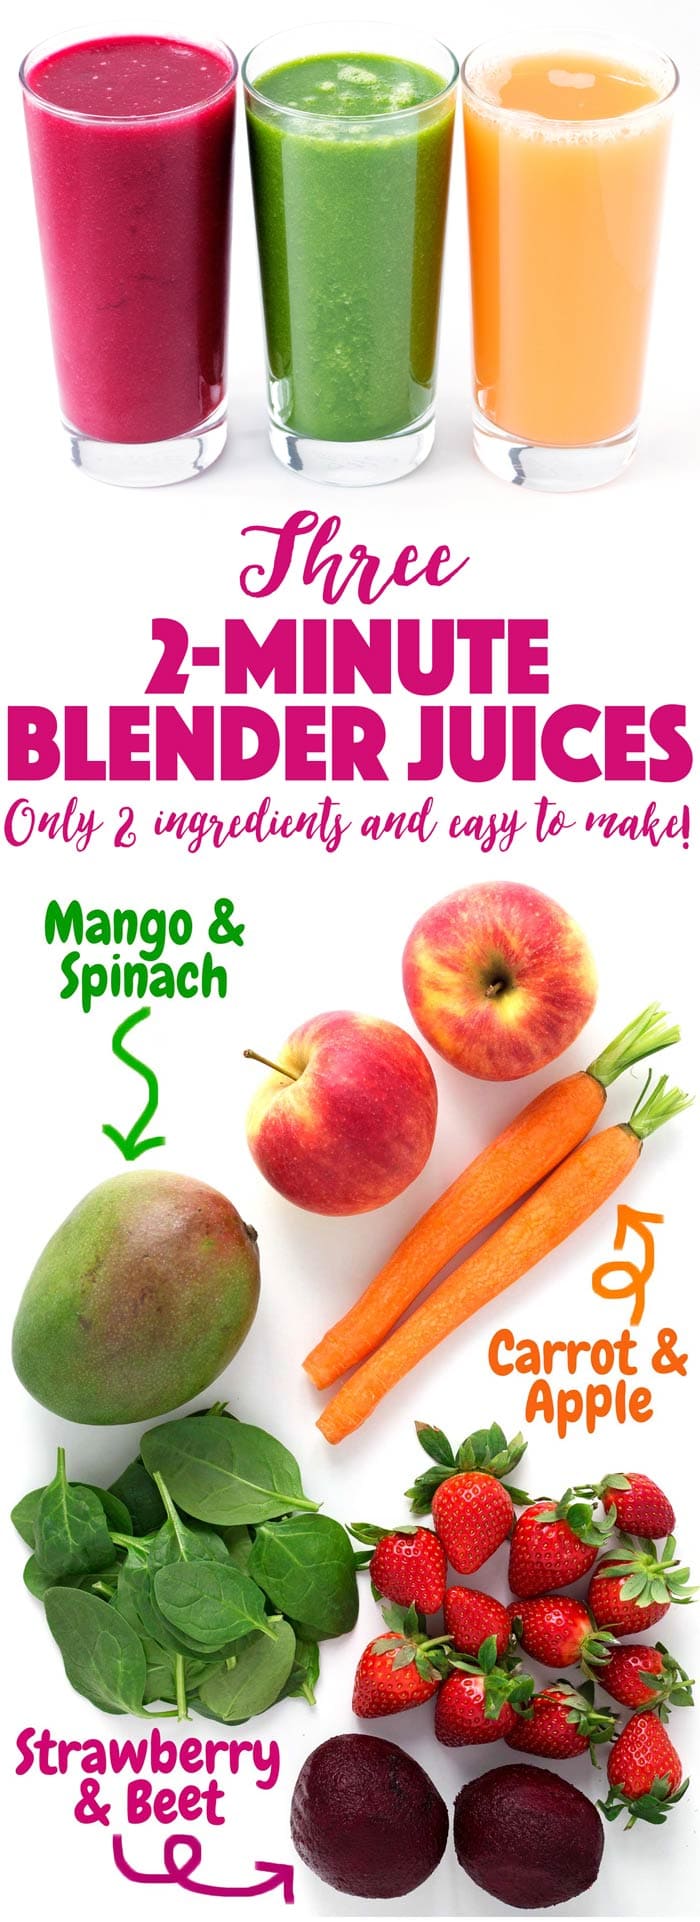 Strawberry & Beet | Mango & Spinach | Carrot & Apple | Quick and easy juices you can make in a Vitamix or blender! They are paleo, Whole30, and vegan. 